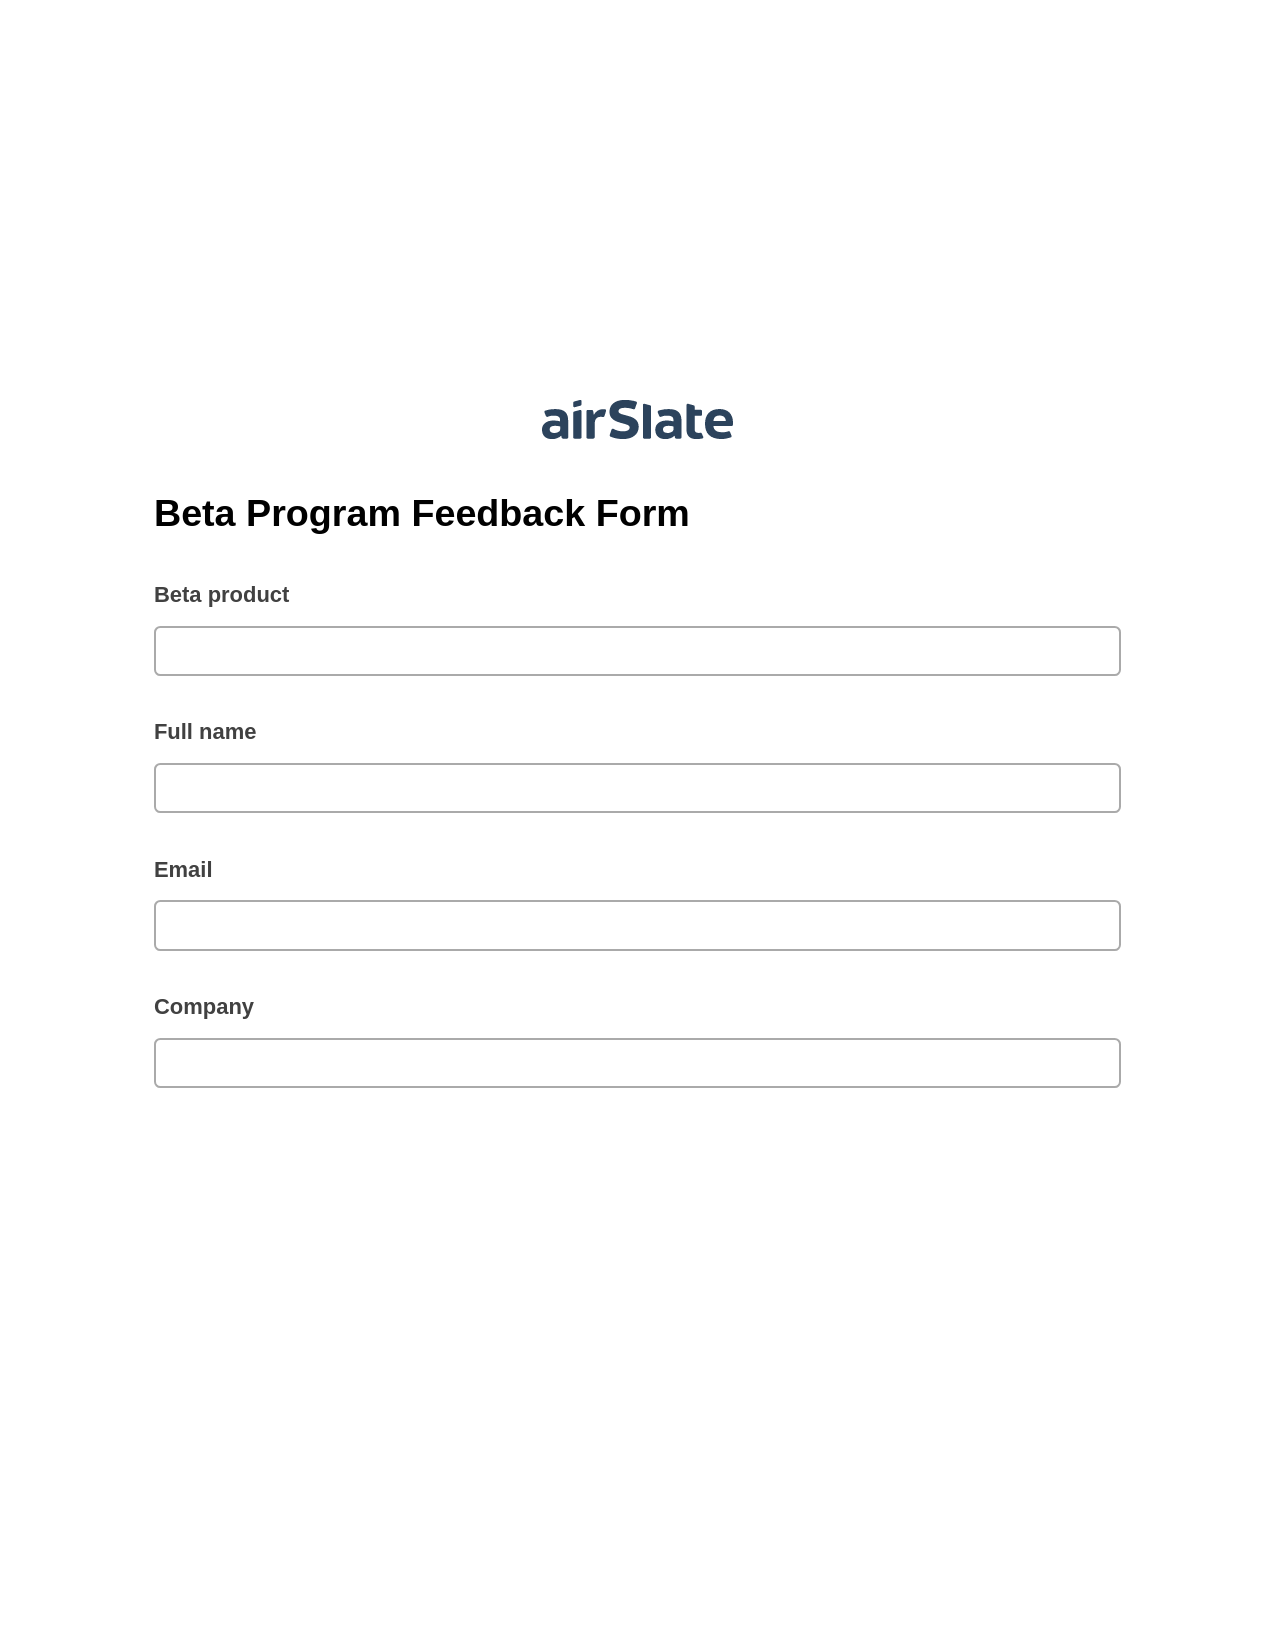 Beta Program Feedback Form Pre-fill from another Slate Bot, System Bot - Create a Slate in another Flow, OneDrive Bot